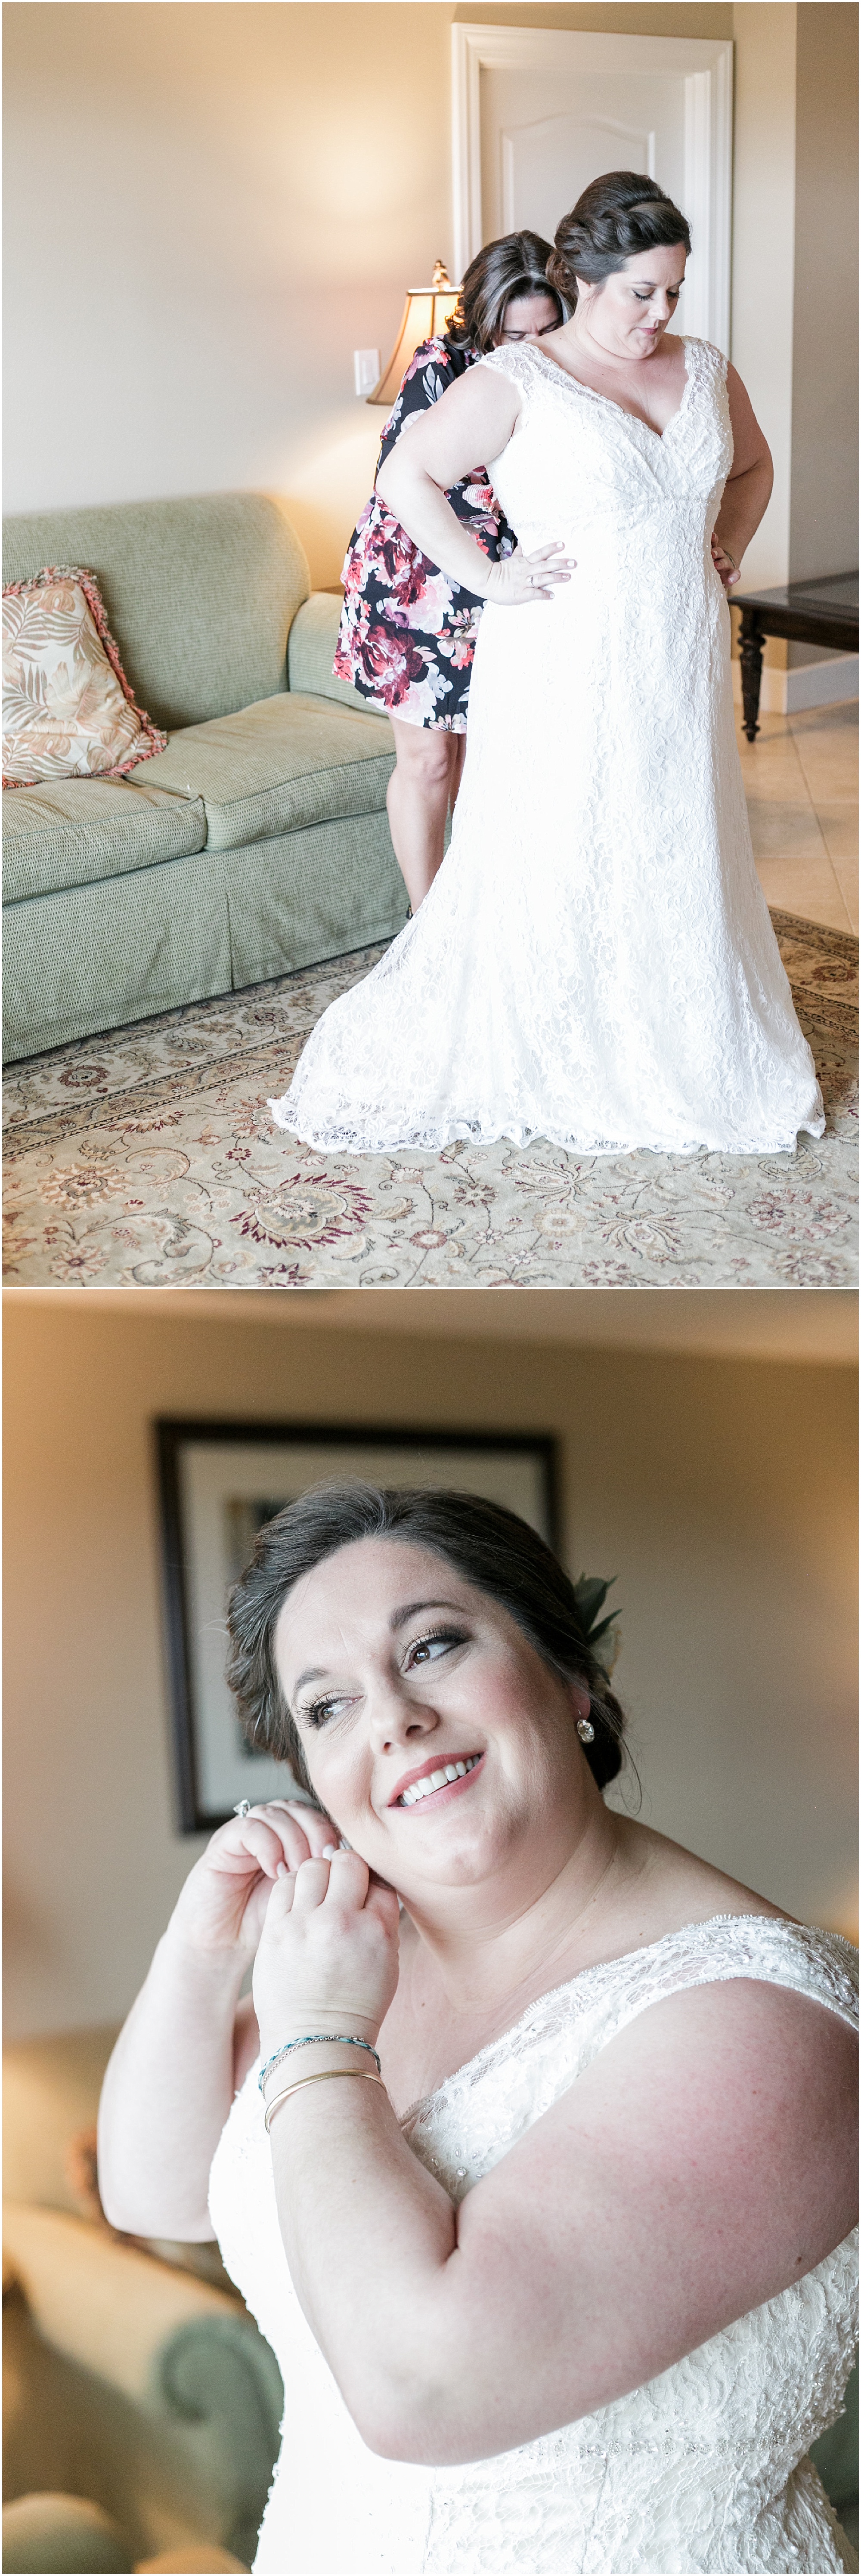 Bride putting on her wedding dress and earrings. 